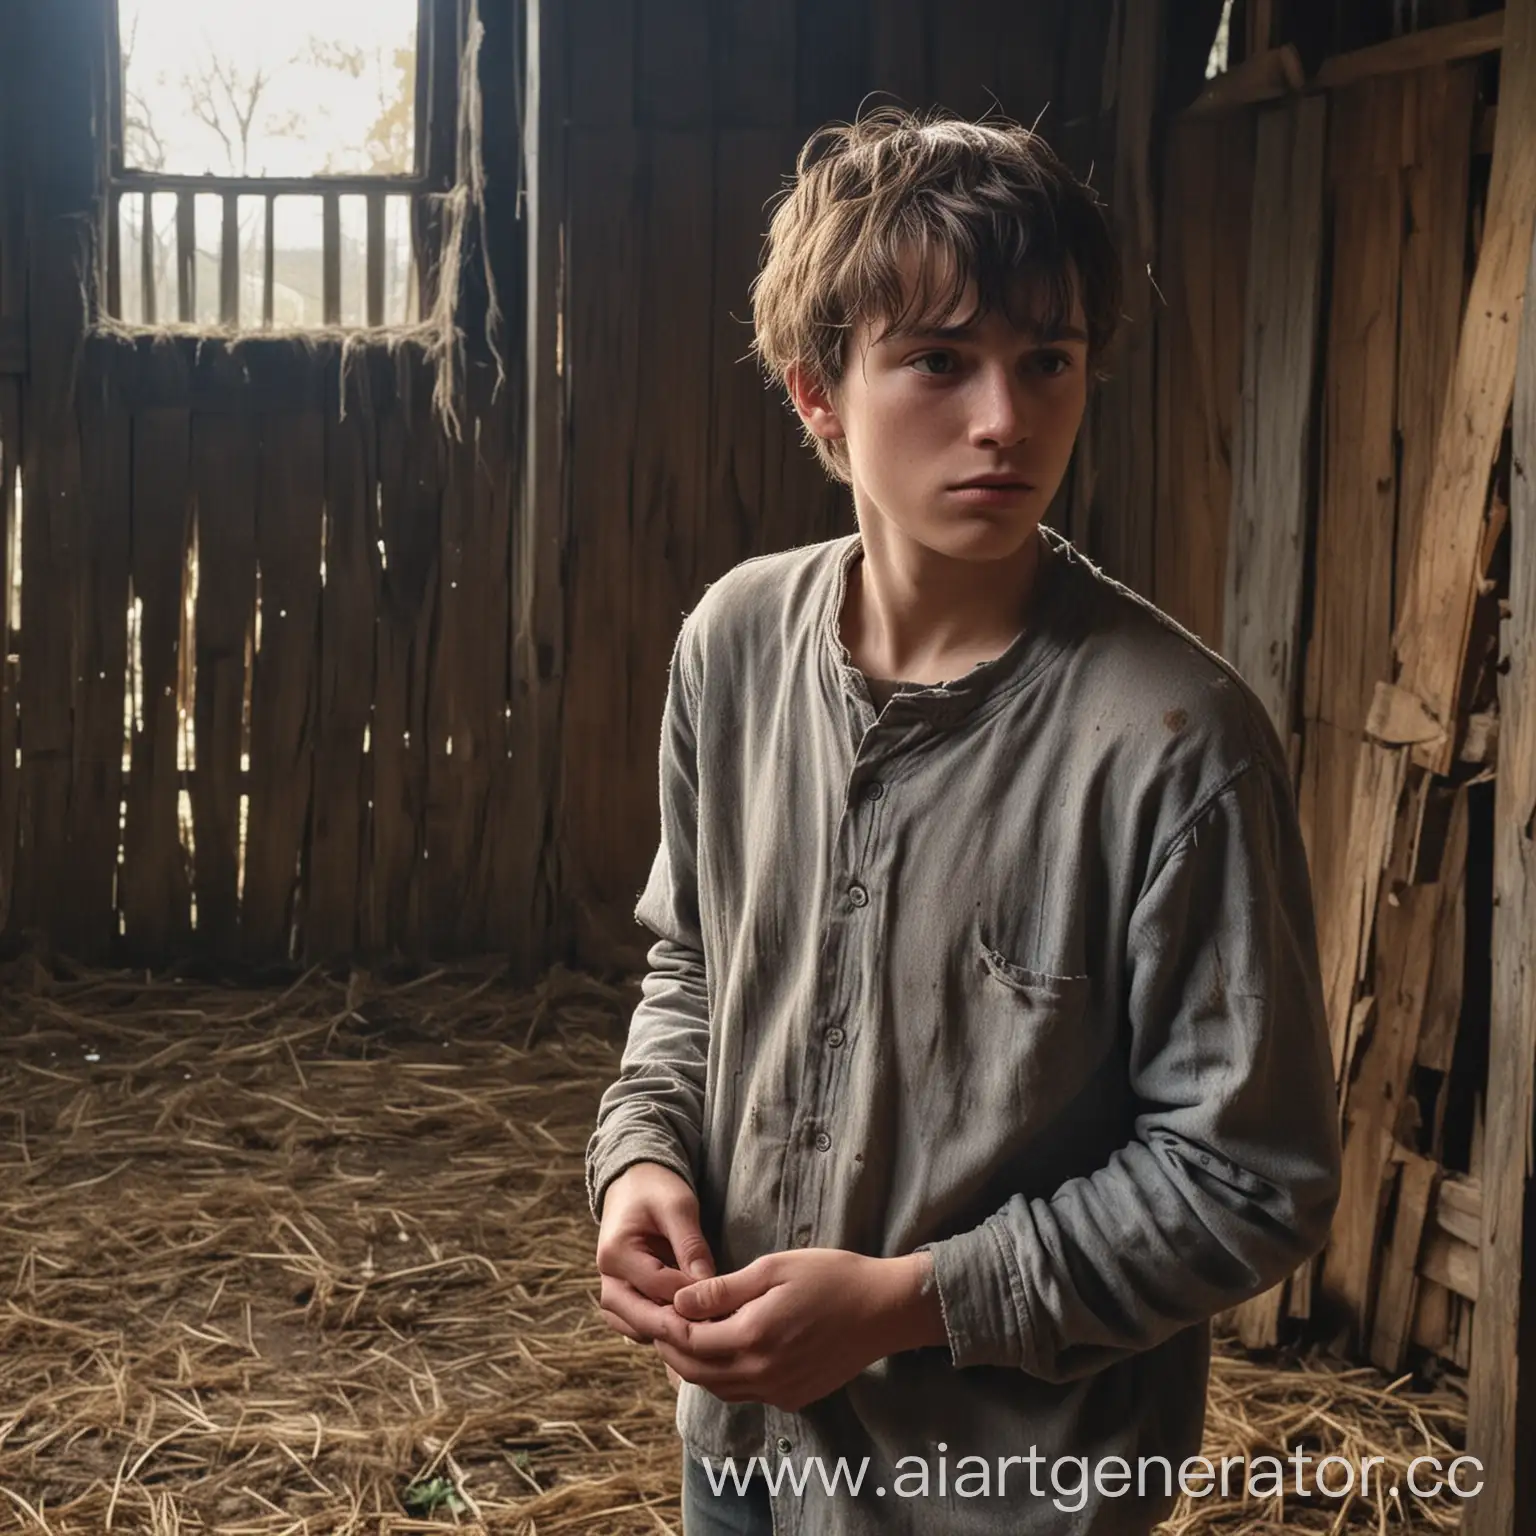 Abandoned-Young-Boy-Alone-in-Old-Barn